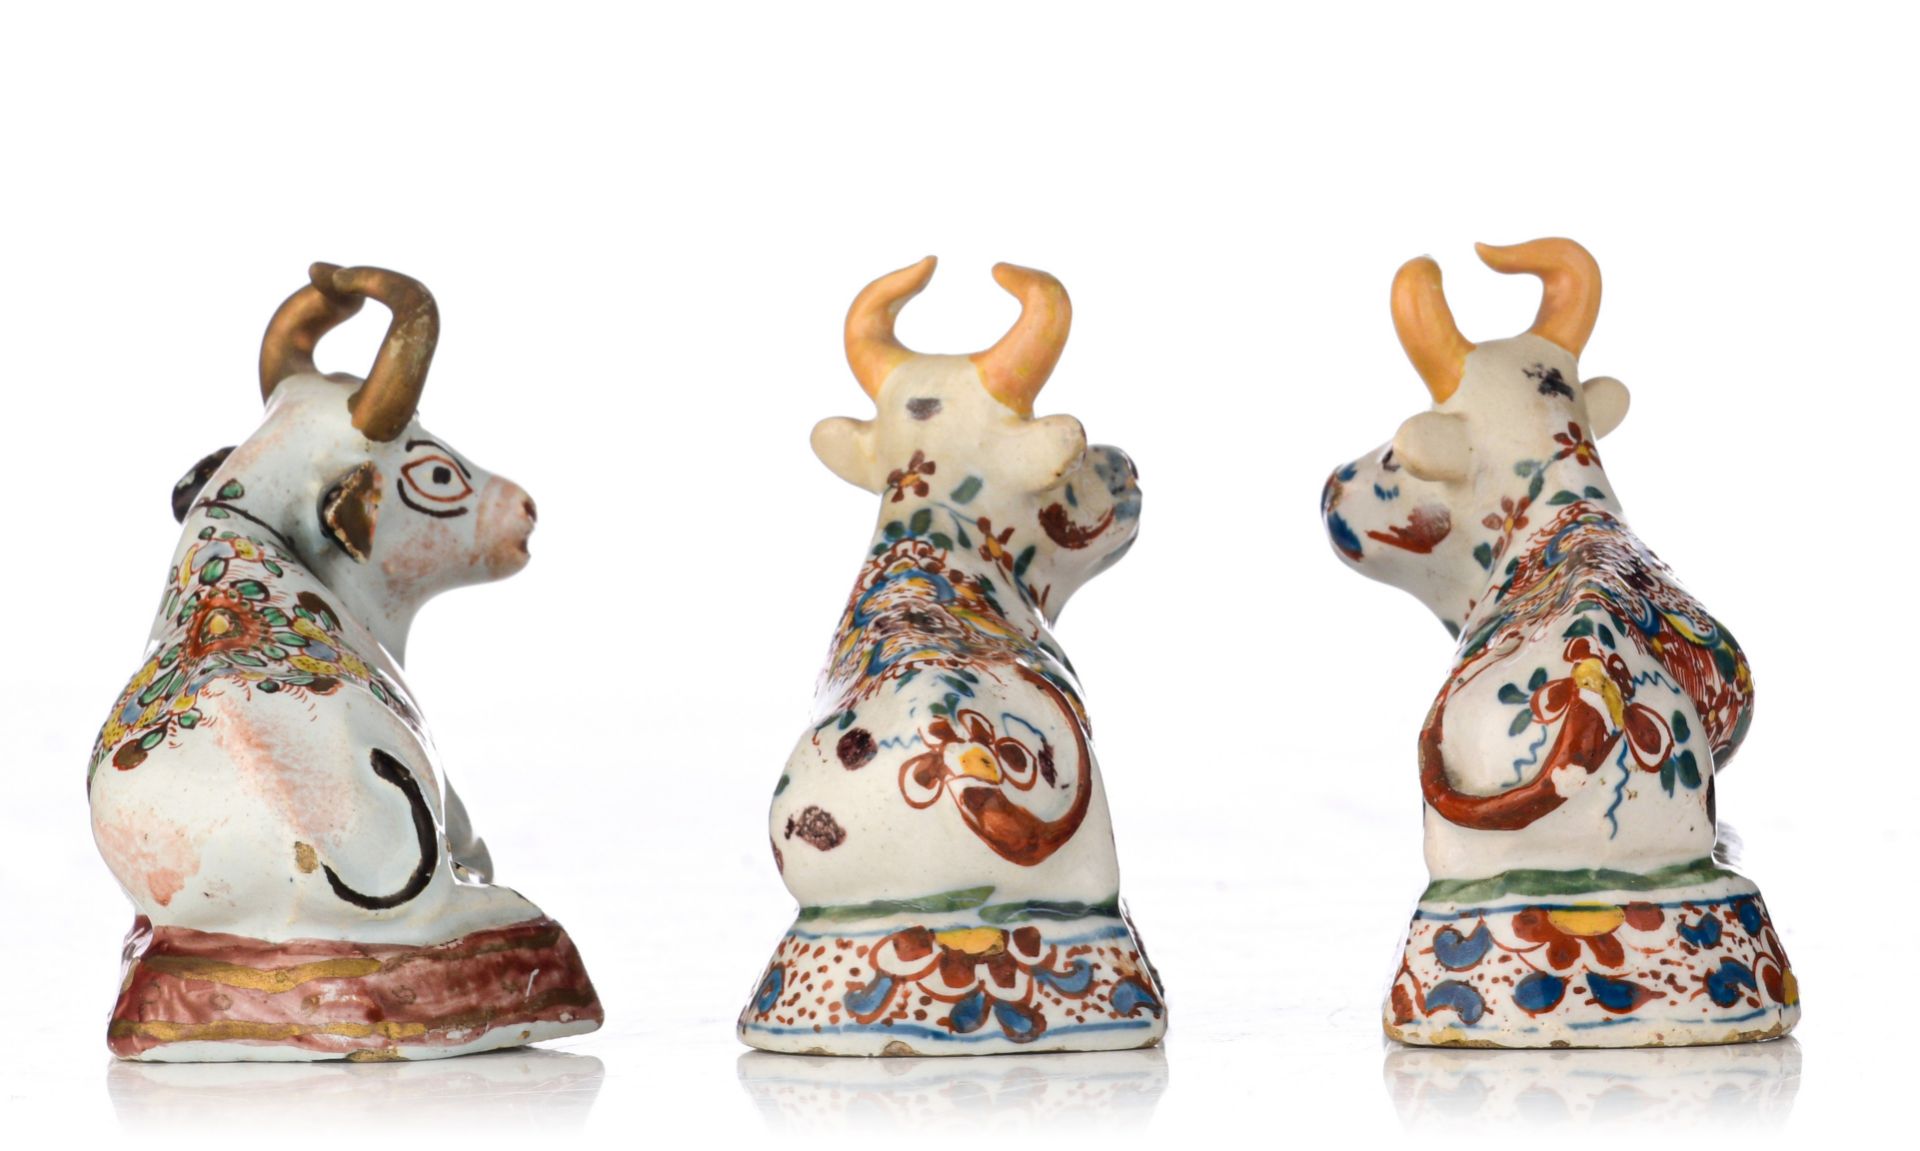 A pair of and a ditto Dutch Delft polychrome figure of a recumbent cow, 18thC, H 8-9 cm - Image 3 of 15